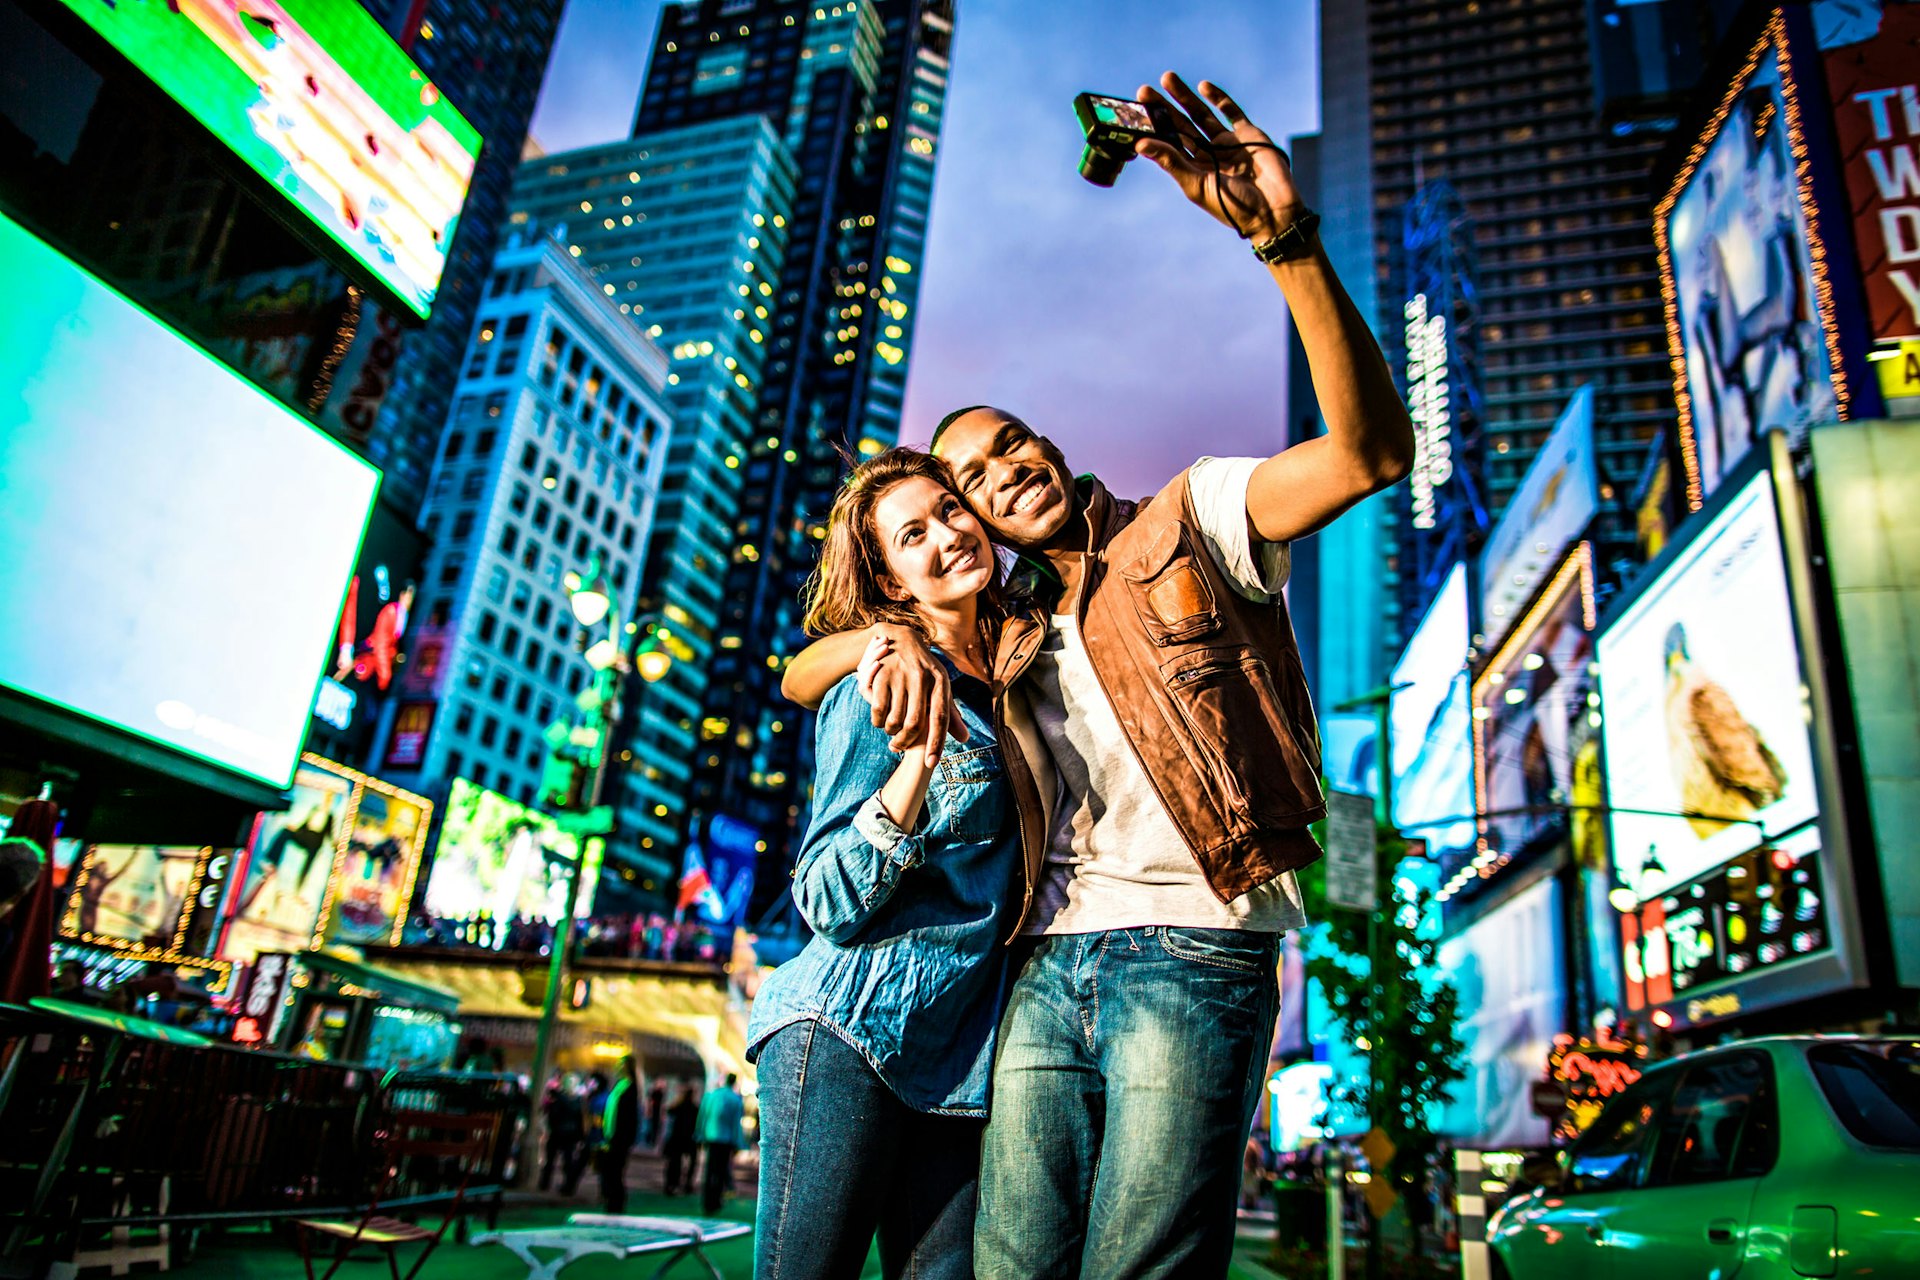 Couple in Times Square - New York City